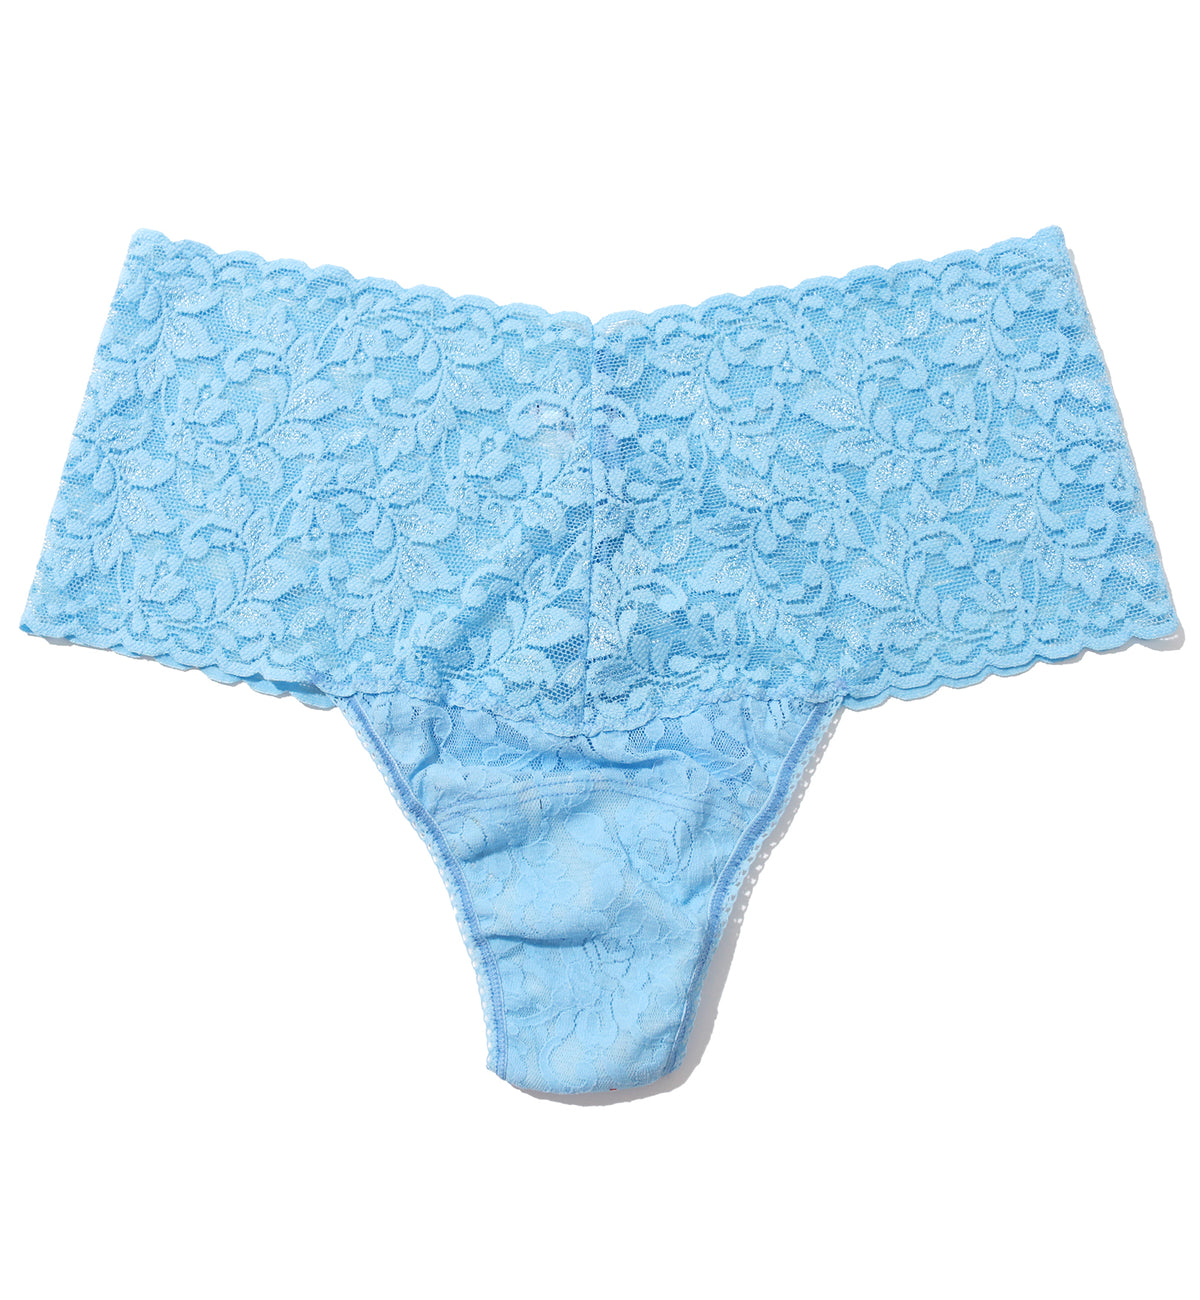 Hanky Panky Retro Lace Thong (9K1926P),Partly Cloudy - Partly Cloudy,One Size